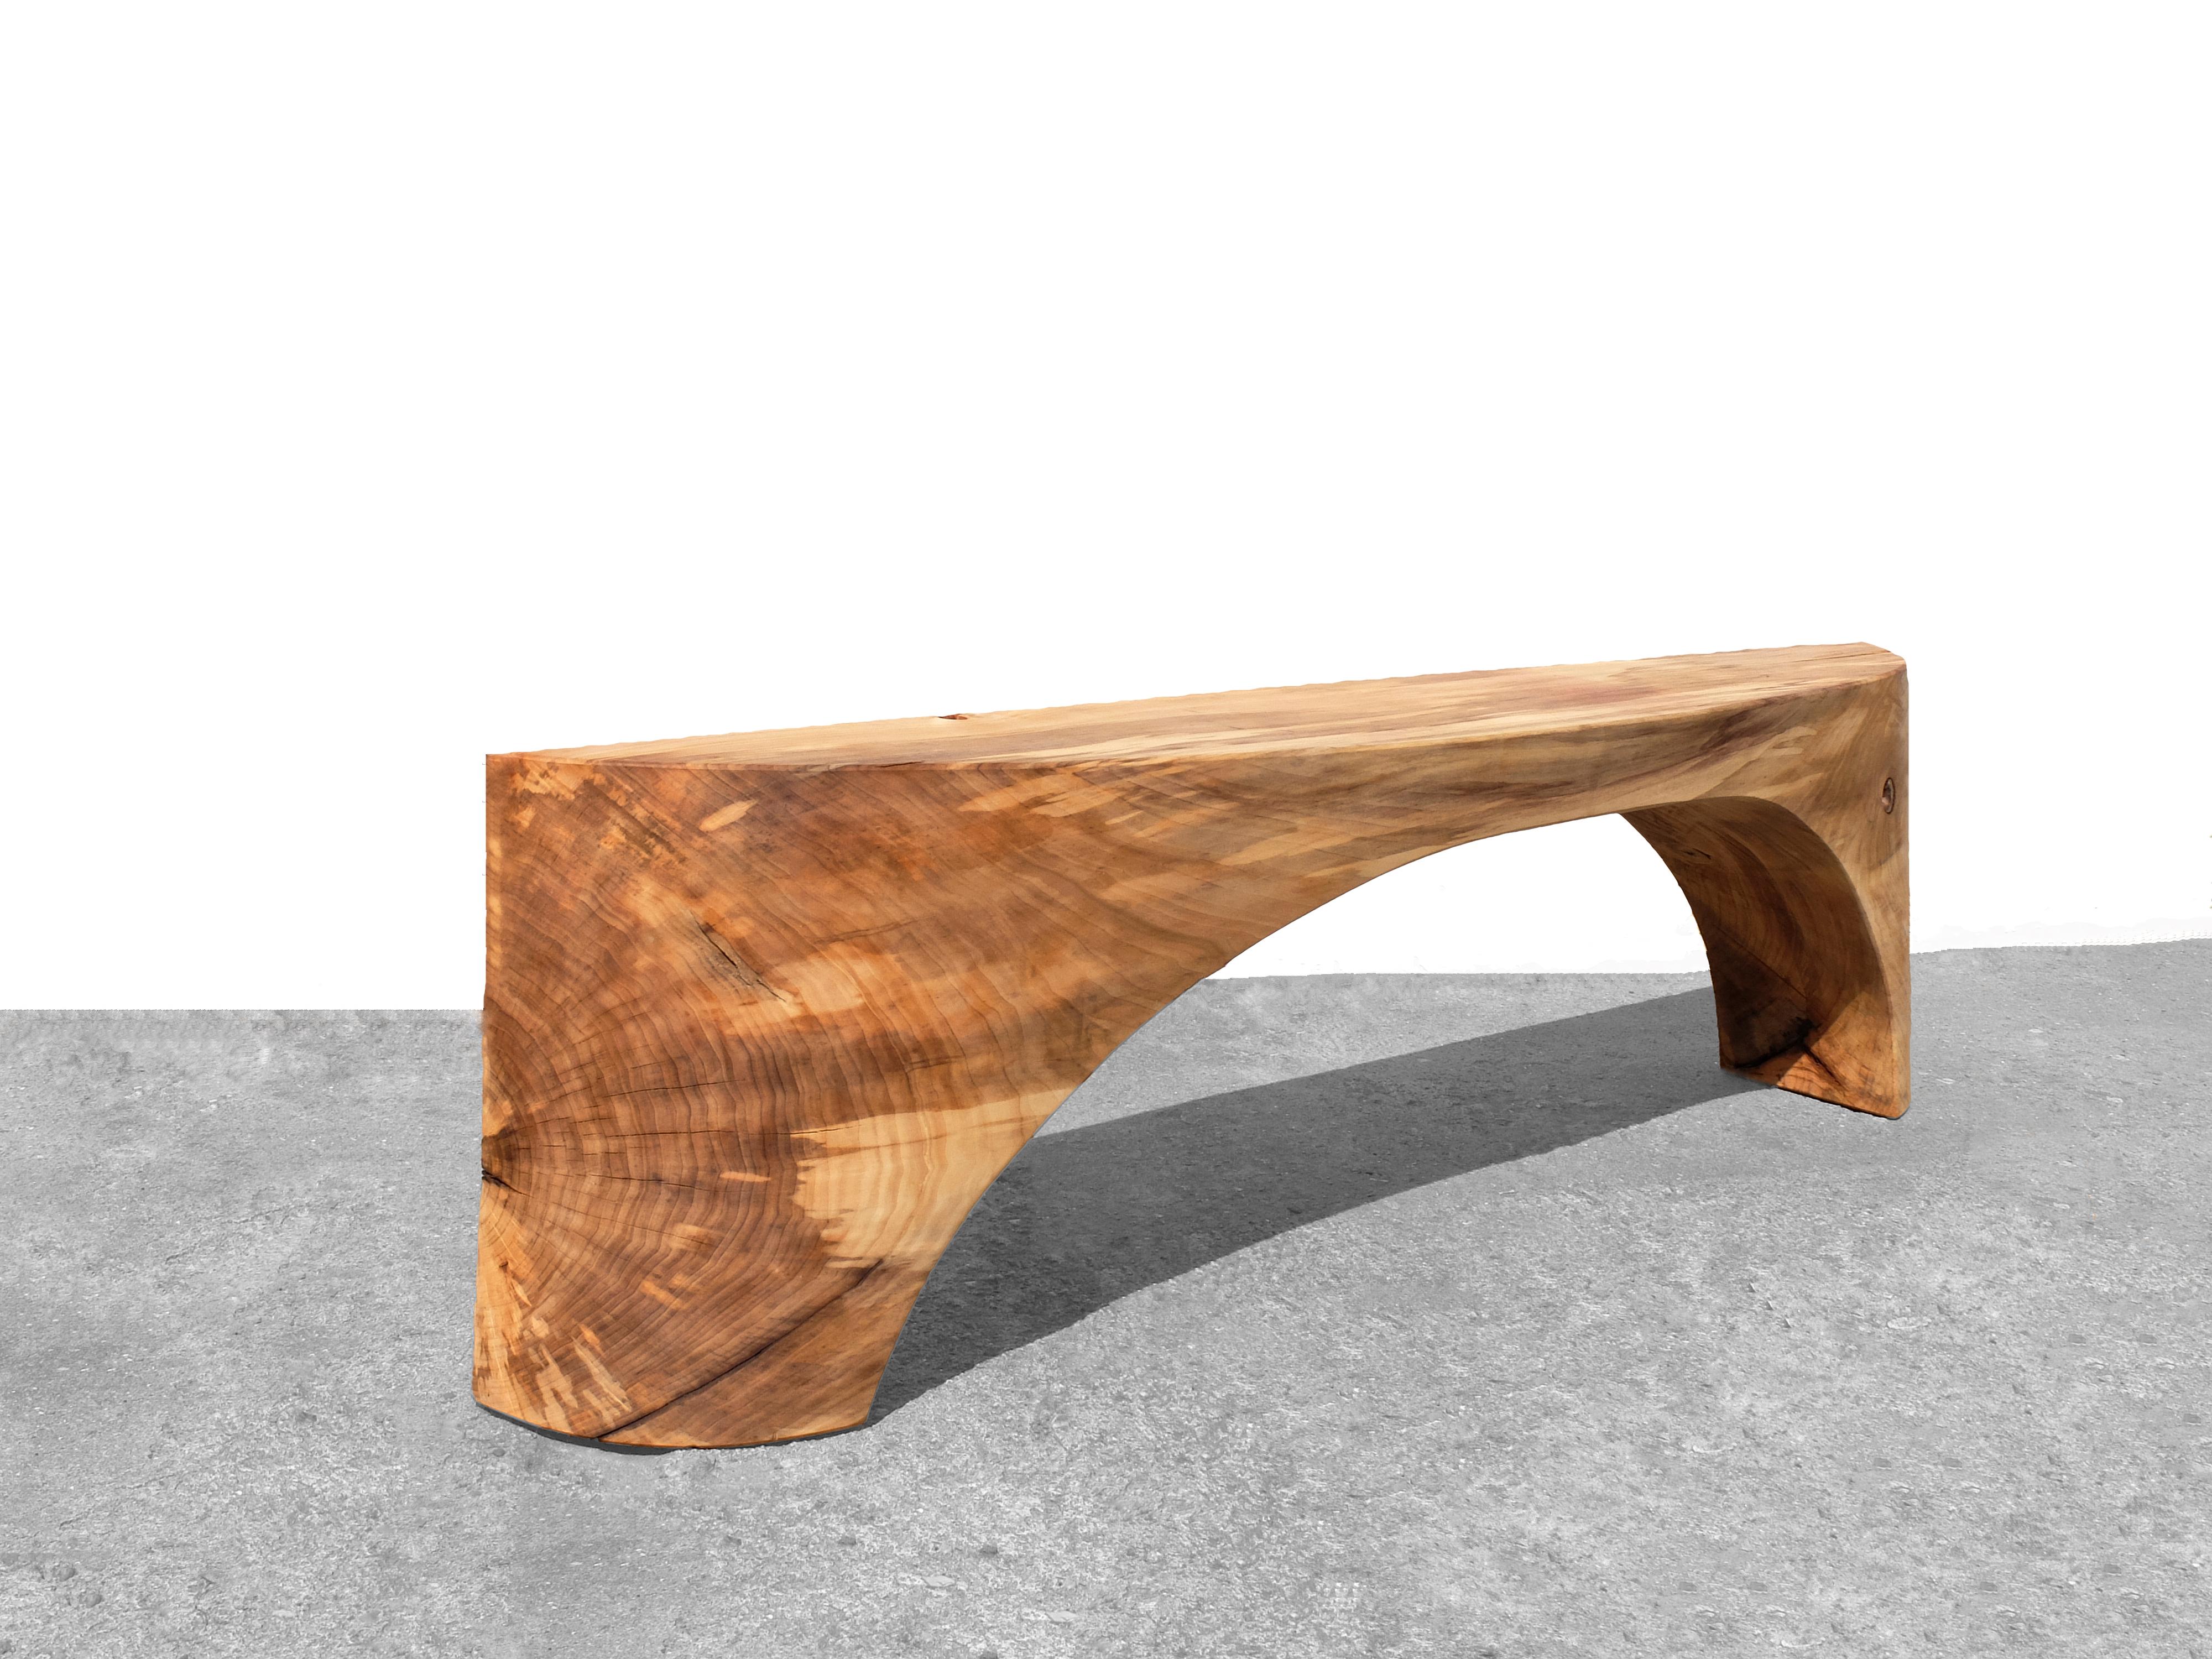 Unique Poplar bench sculpted by Jörg Pietschmann
Materials: Polished poplar, oil finish
Dimensions: H 59 x W 207 x D 33 cm

In Pietschmann’s sculptures, trees that for centuries were part of a landscape and founded in primordial forces tell stories